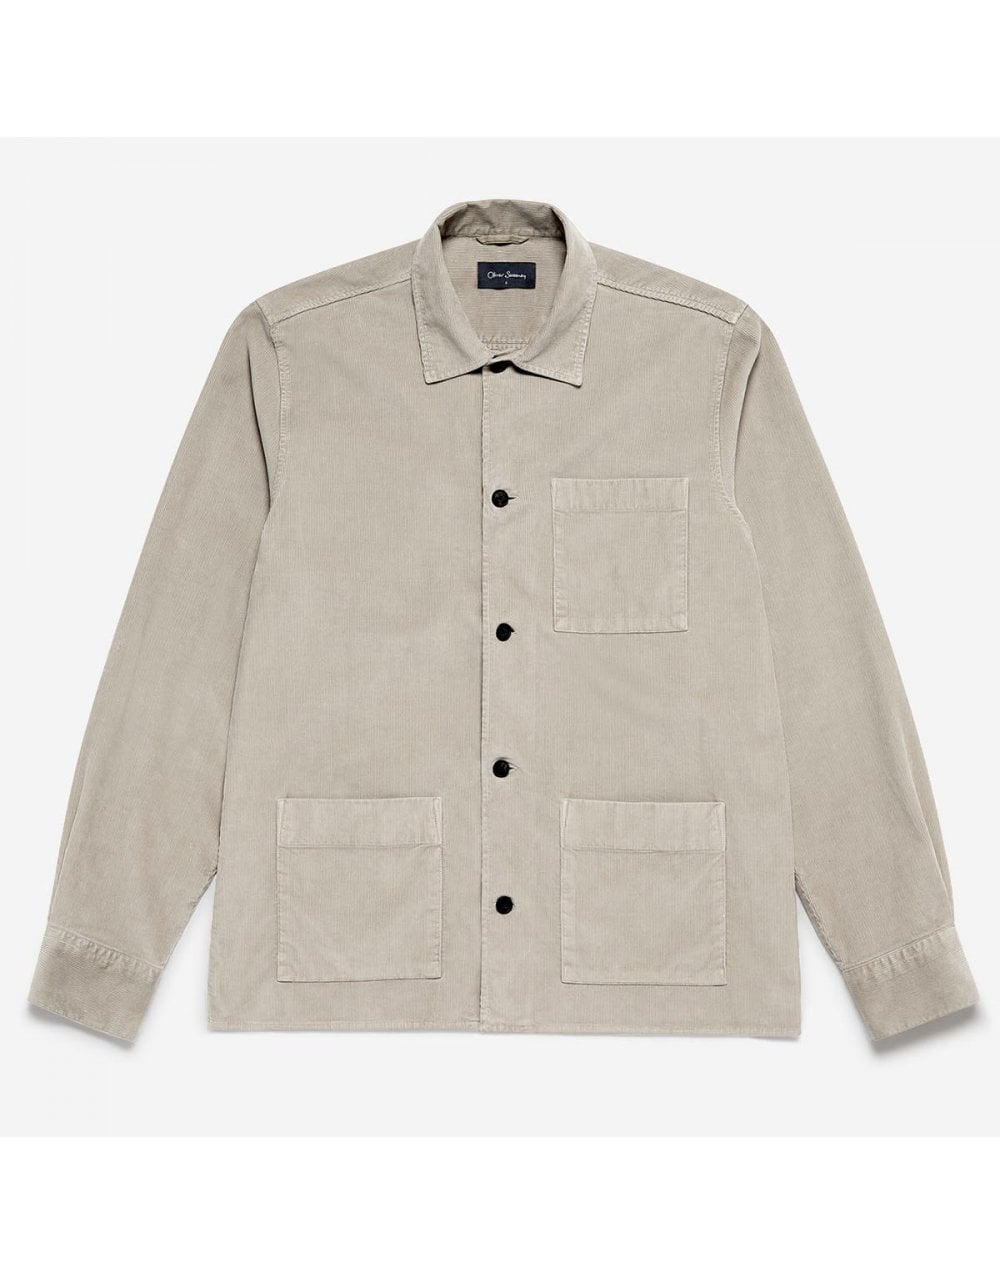 Oliver Sweeney Oliver Sweeney Wicklow Corduroy Shacket Size: M, Col: Taupe